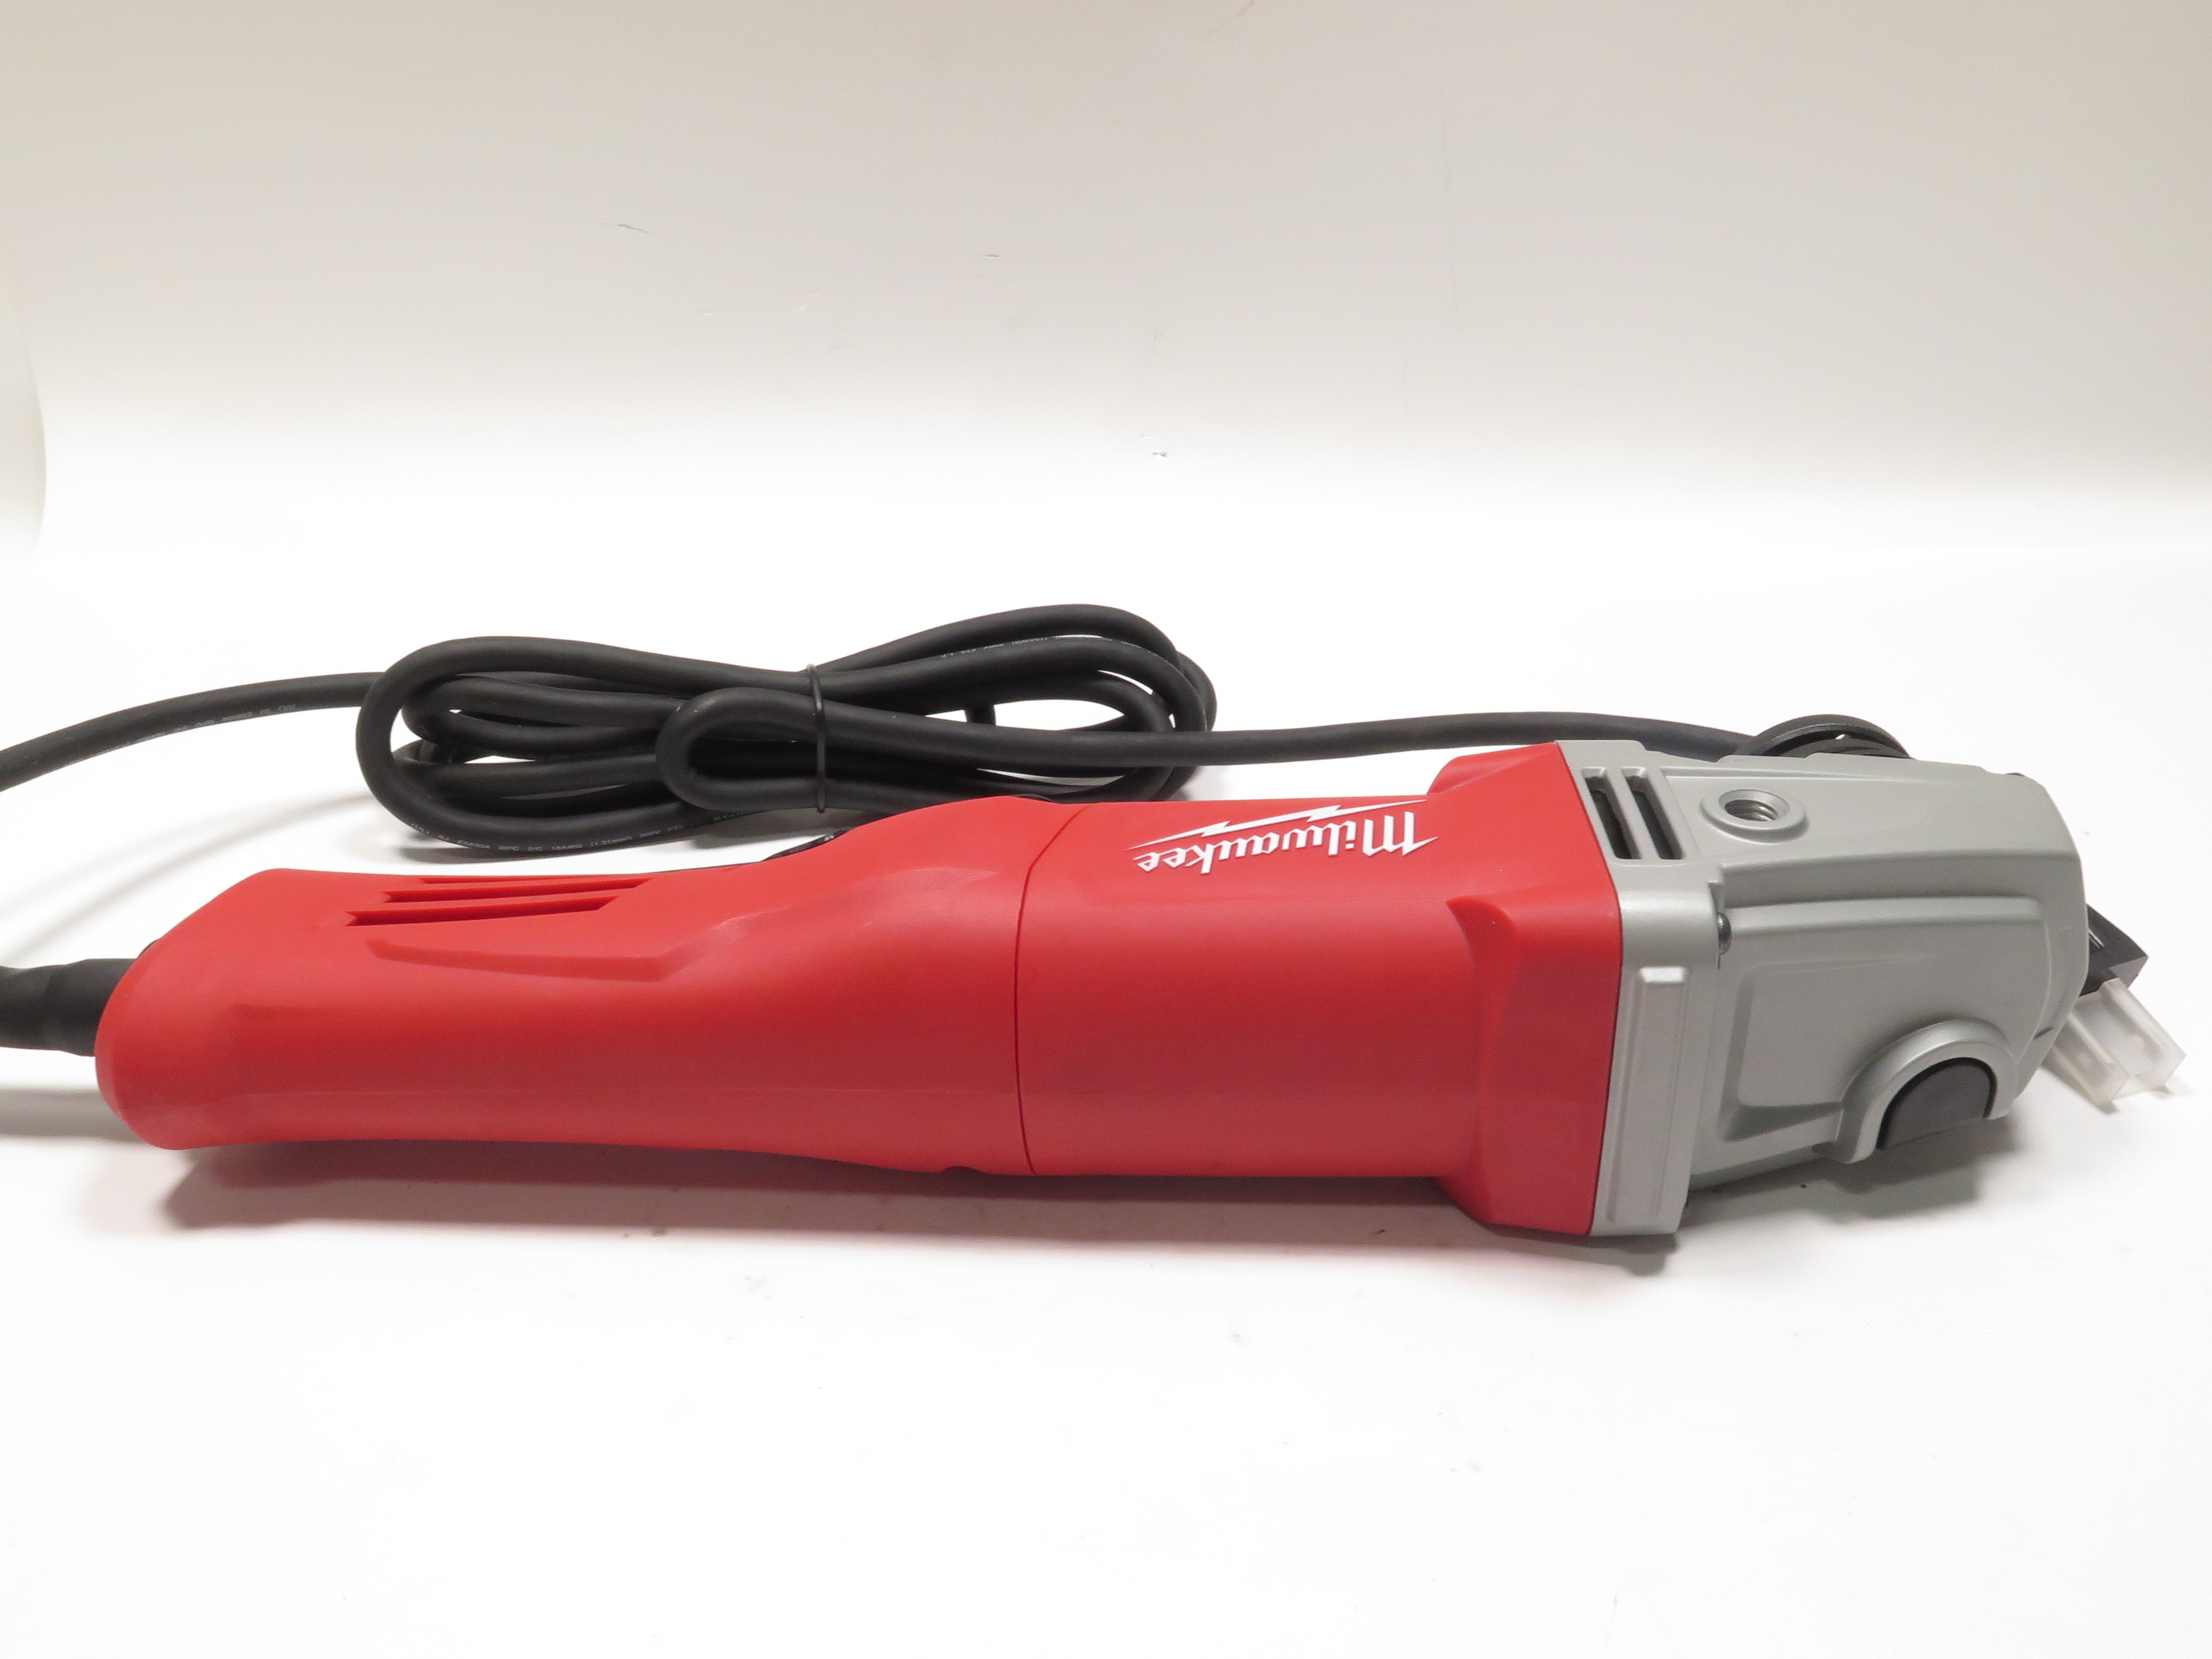 Milwaukee 6142-30 11 Amp Corded 4-1/2 in. Small Angle Grinder 5036